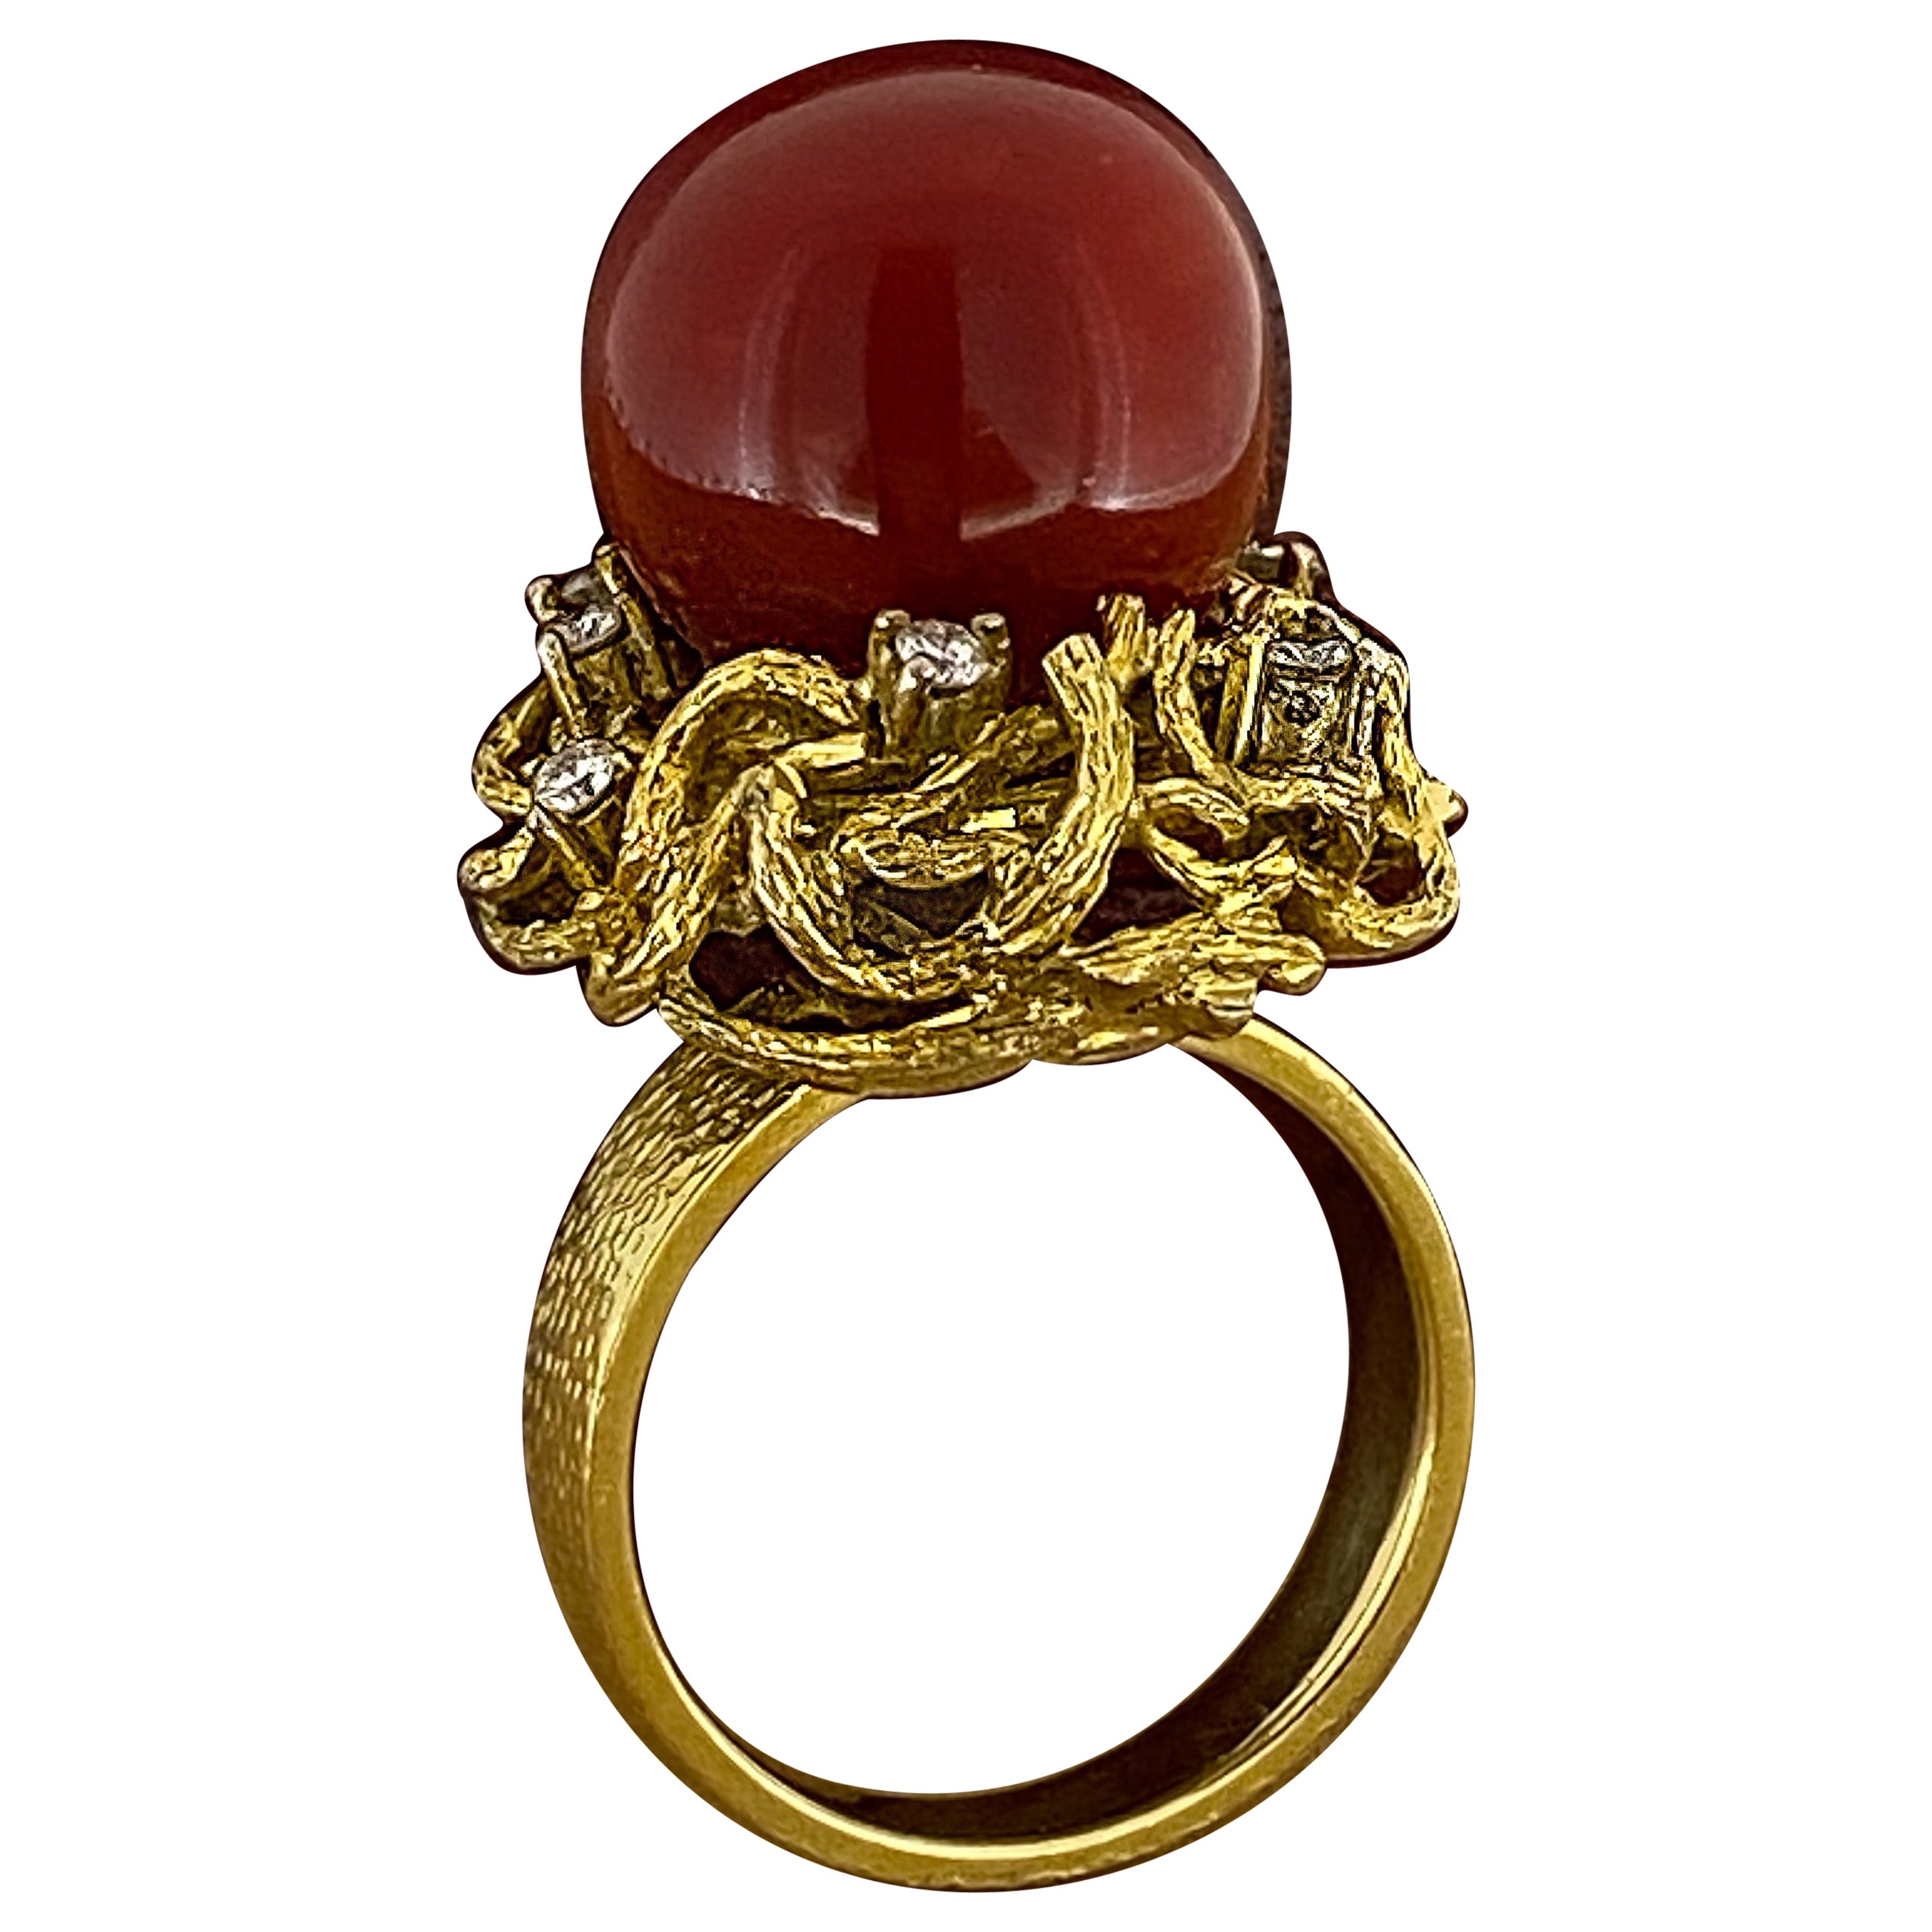 20ct (14mm) Natural Mediterranean OxBlood Red Coral & Diamond Ring in 14K Gold. For Sale